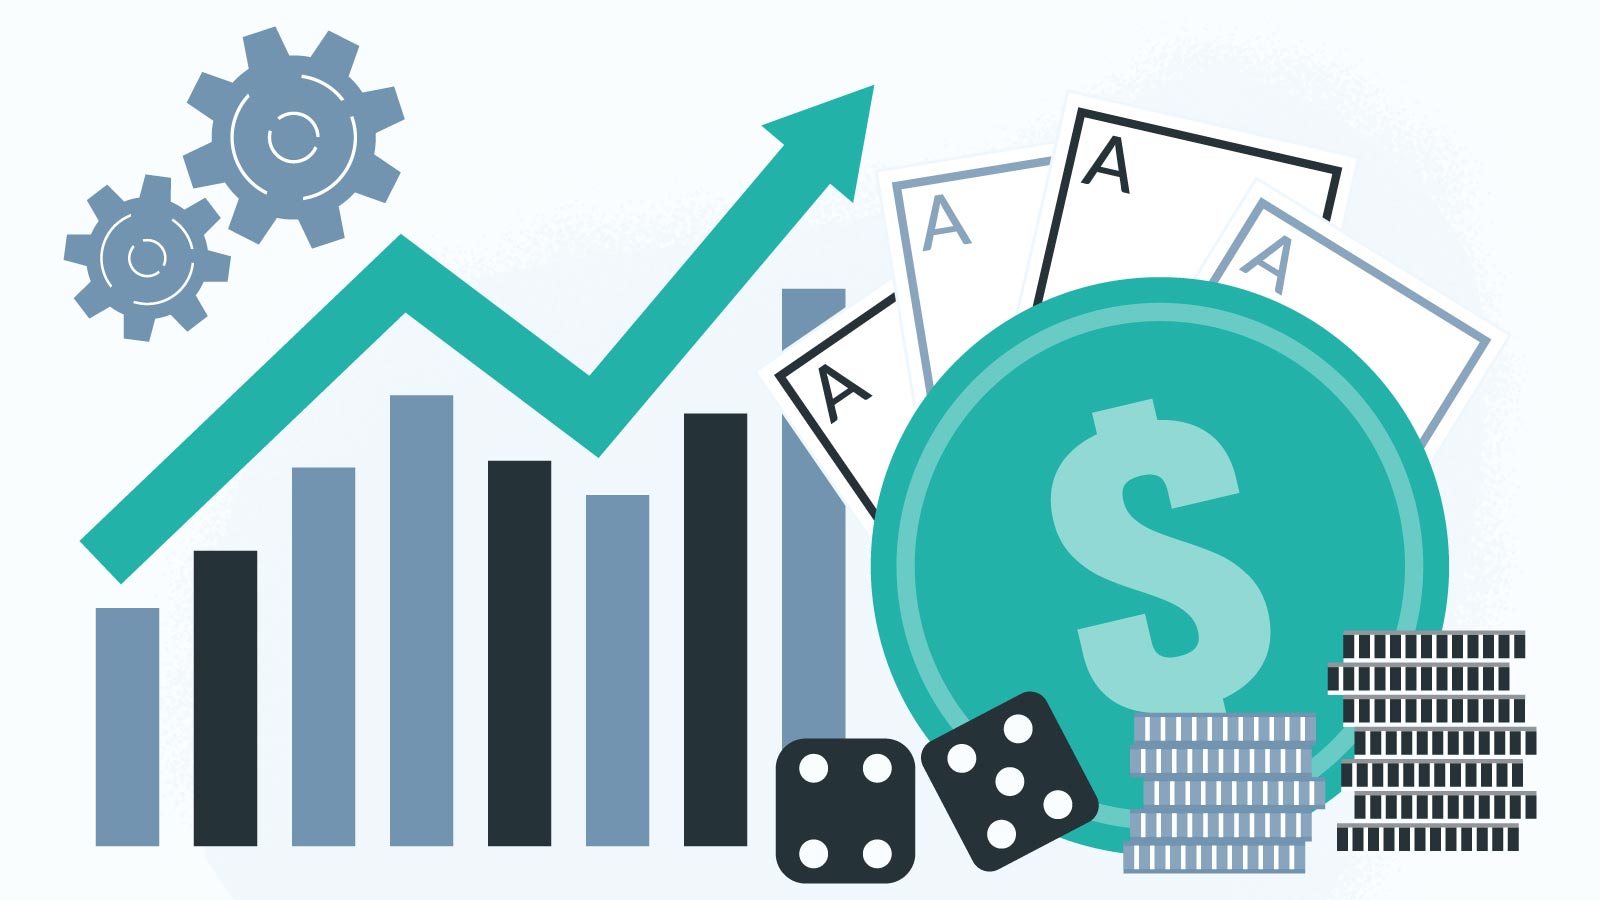 Our procedure for gambling software providers